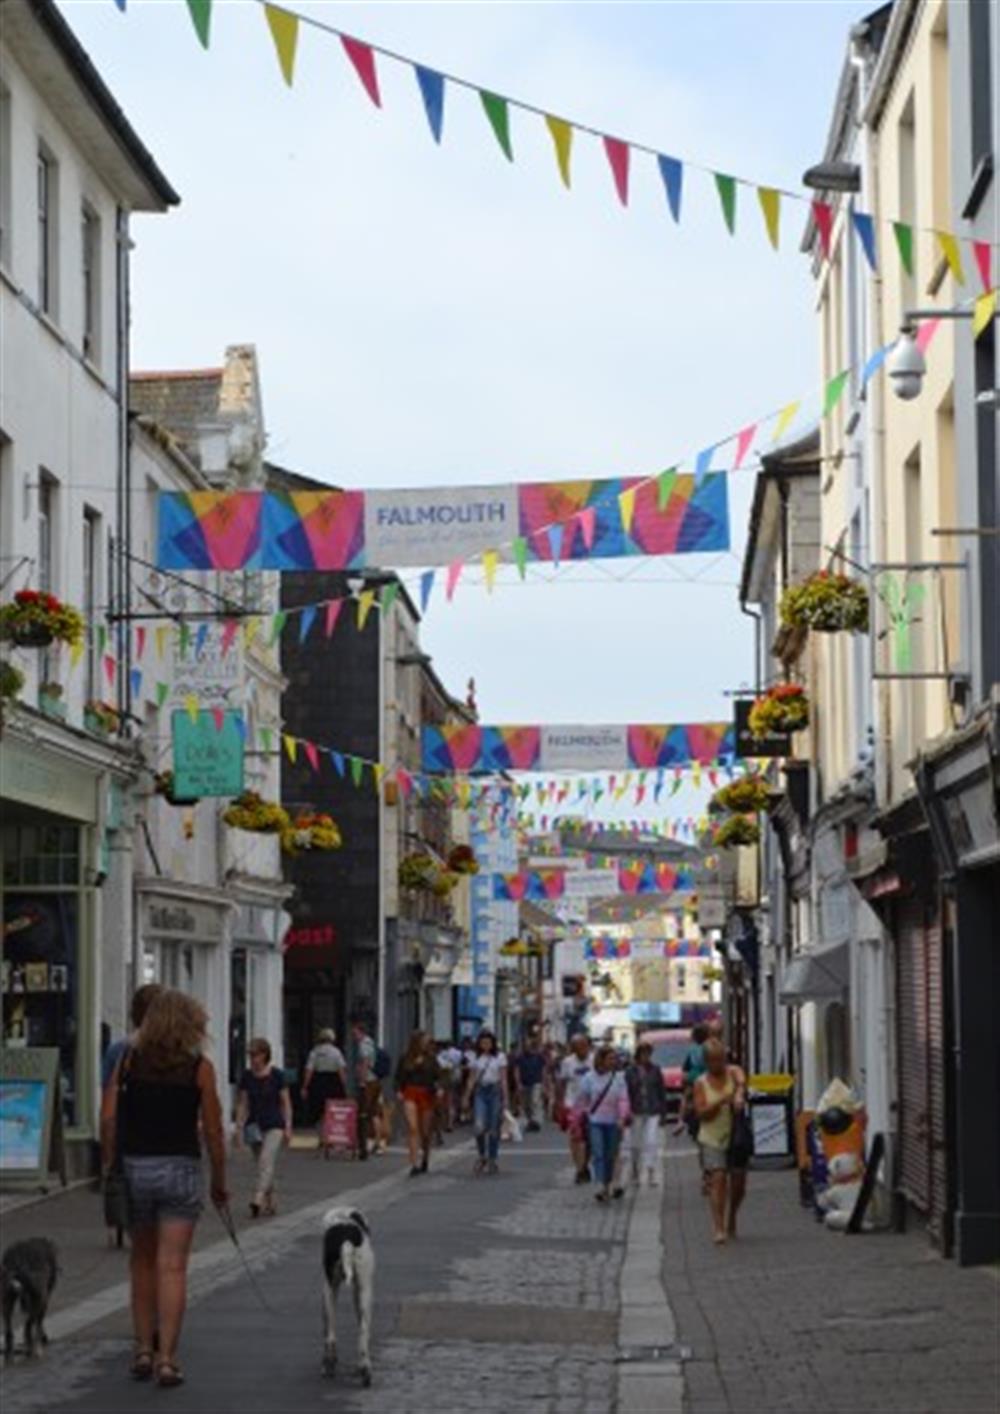 Falmouth High Street for your shopping needs.